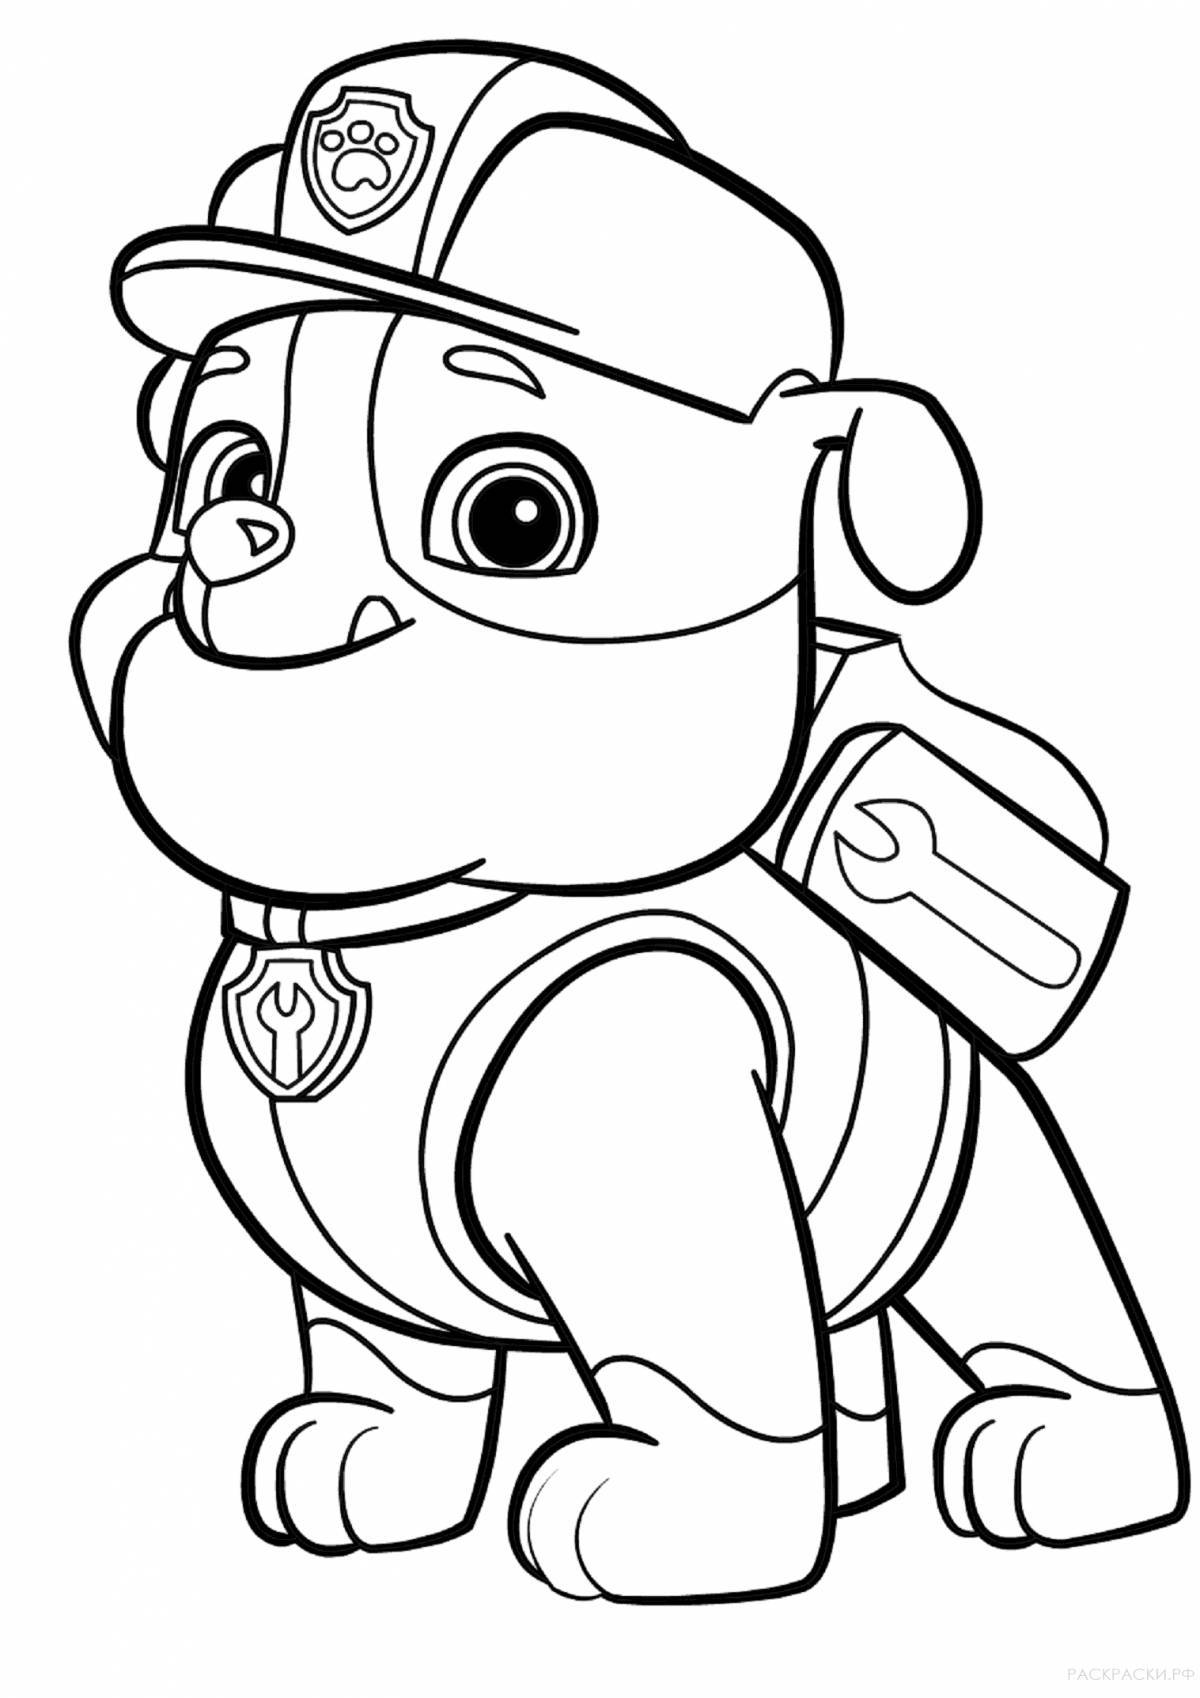 Nice paw patrol coloring page for babies